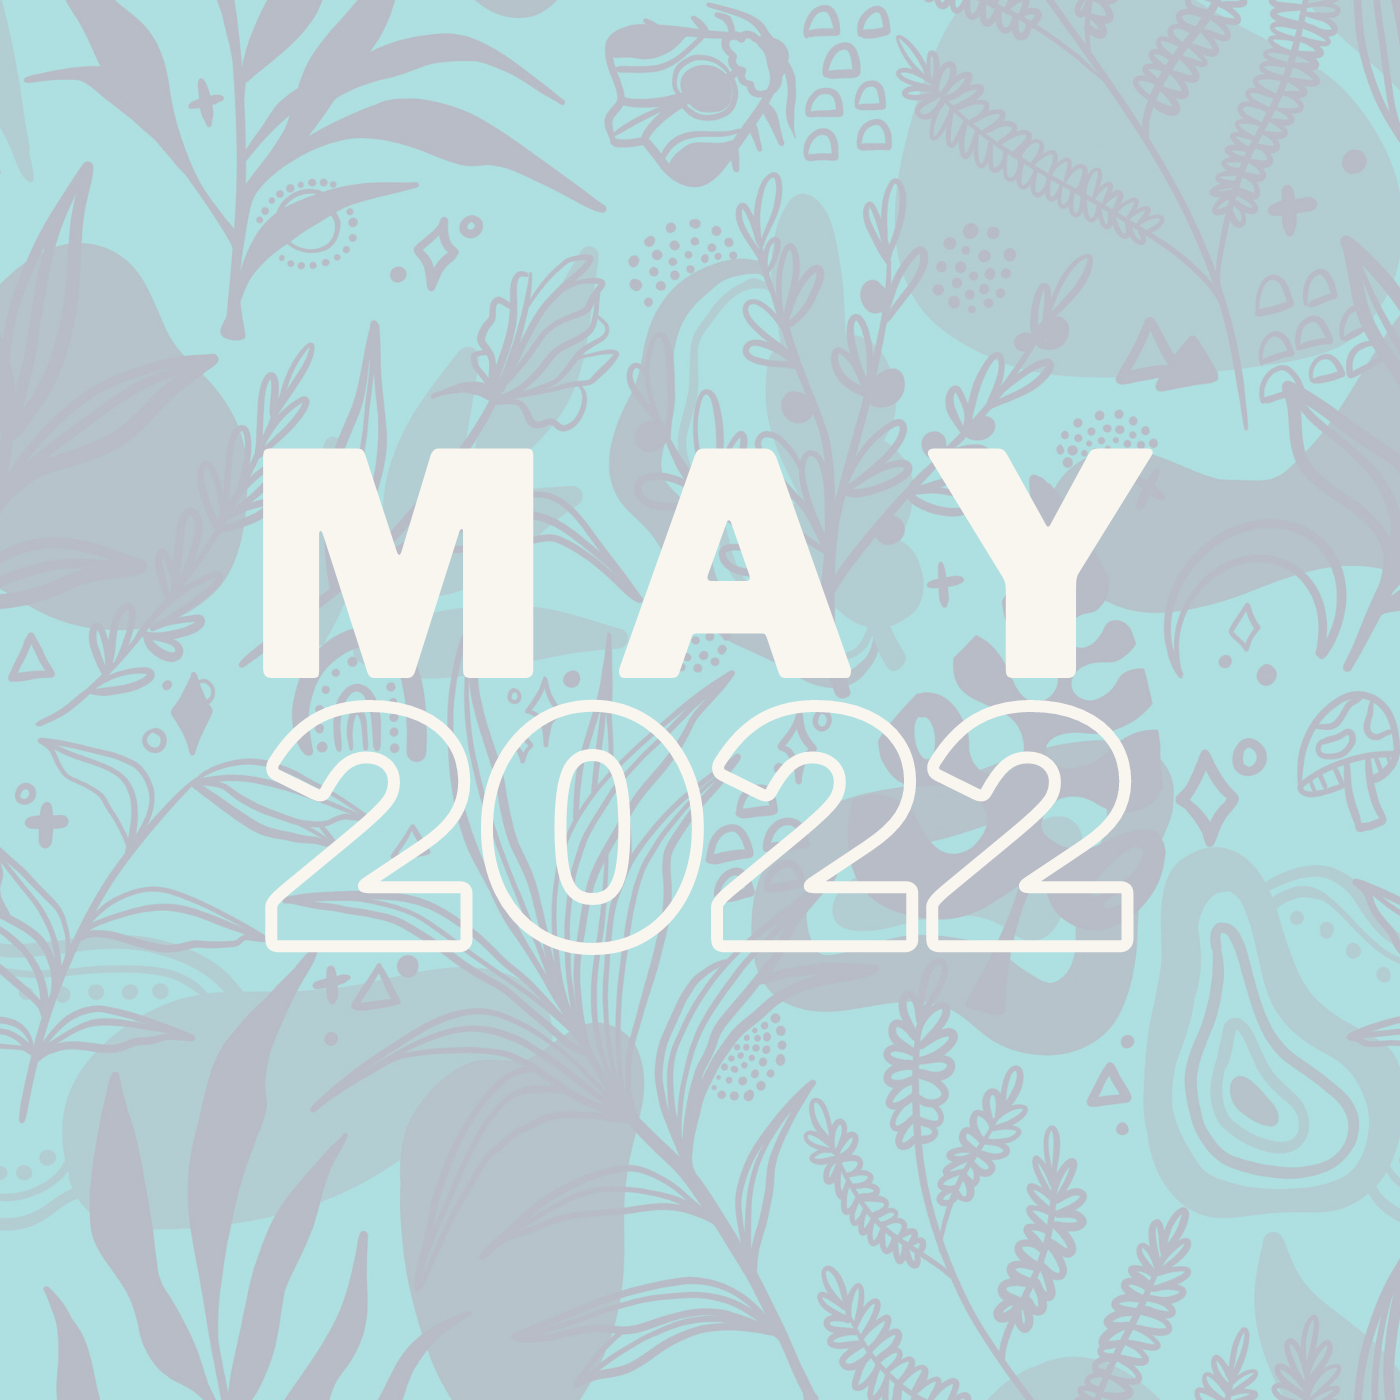 a blue and purple illustration of plants with may 2022 in a sans serif font at the center